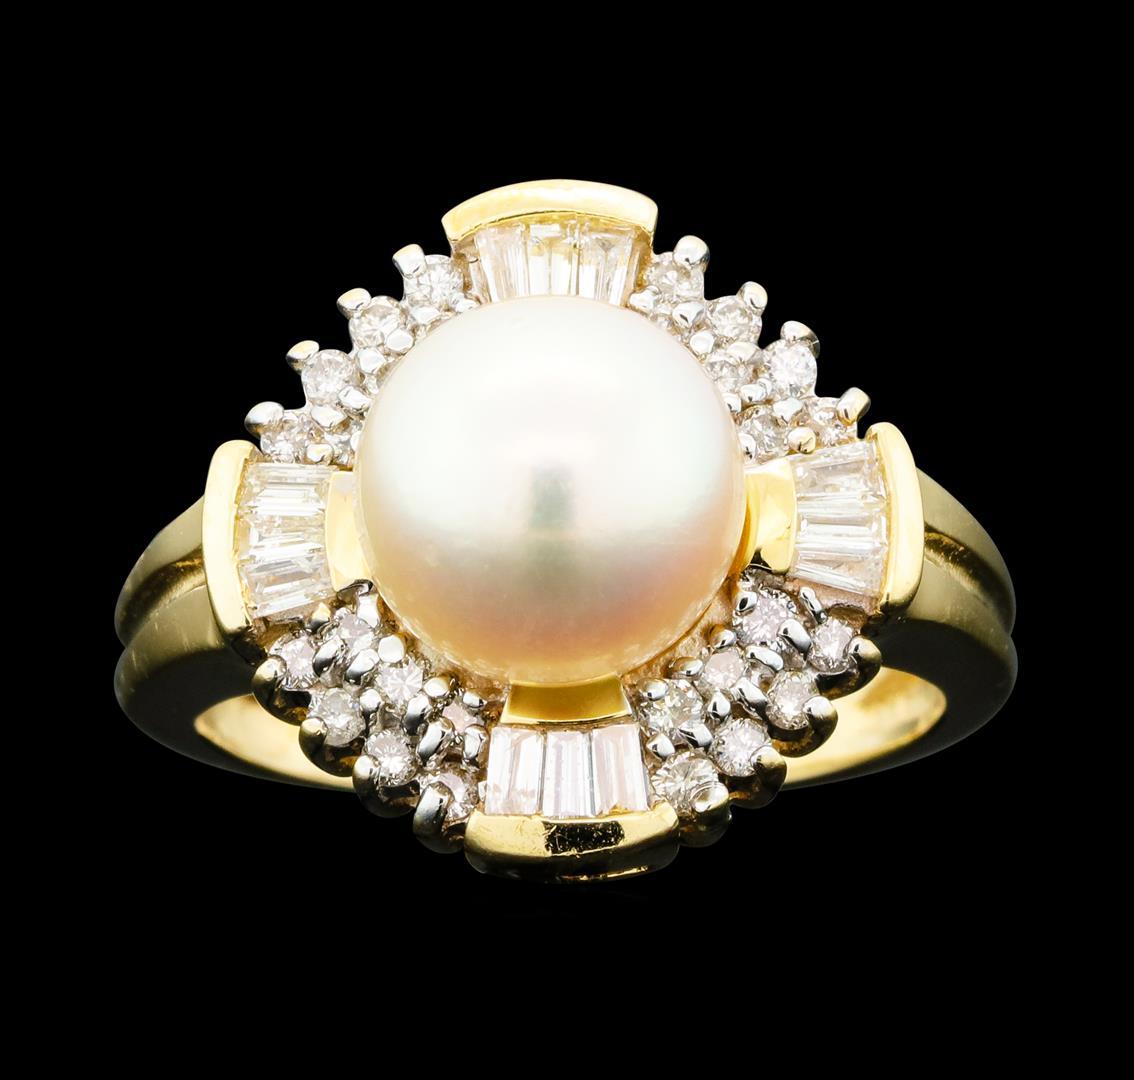 0.60 ctw Diamond and Pearl Ring - 14KT Yellow Gold